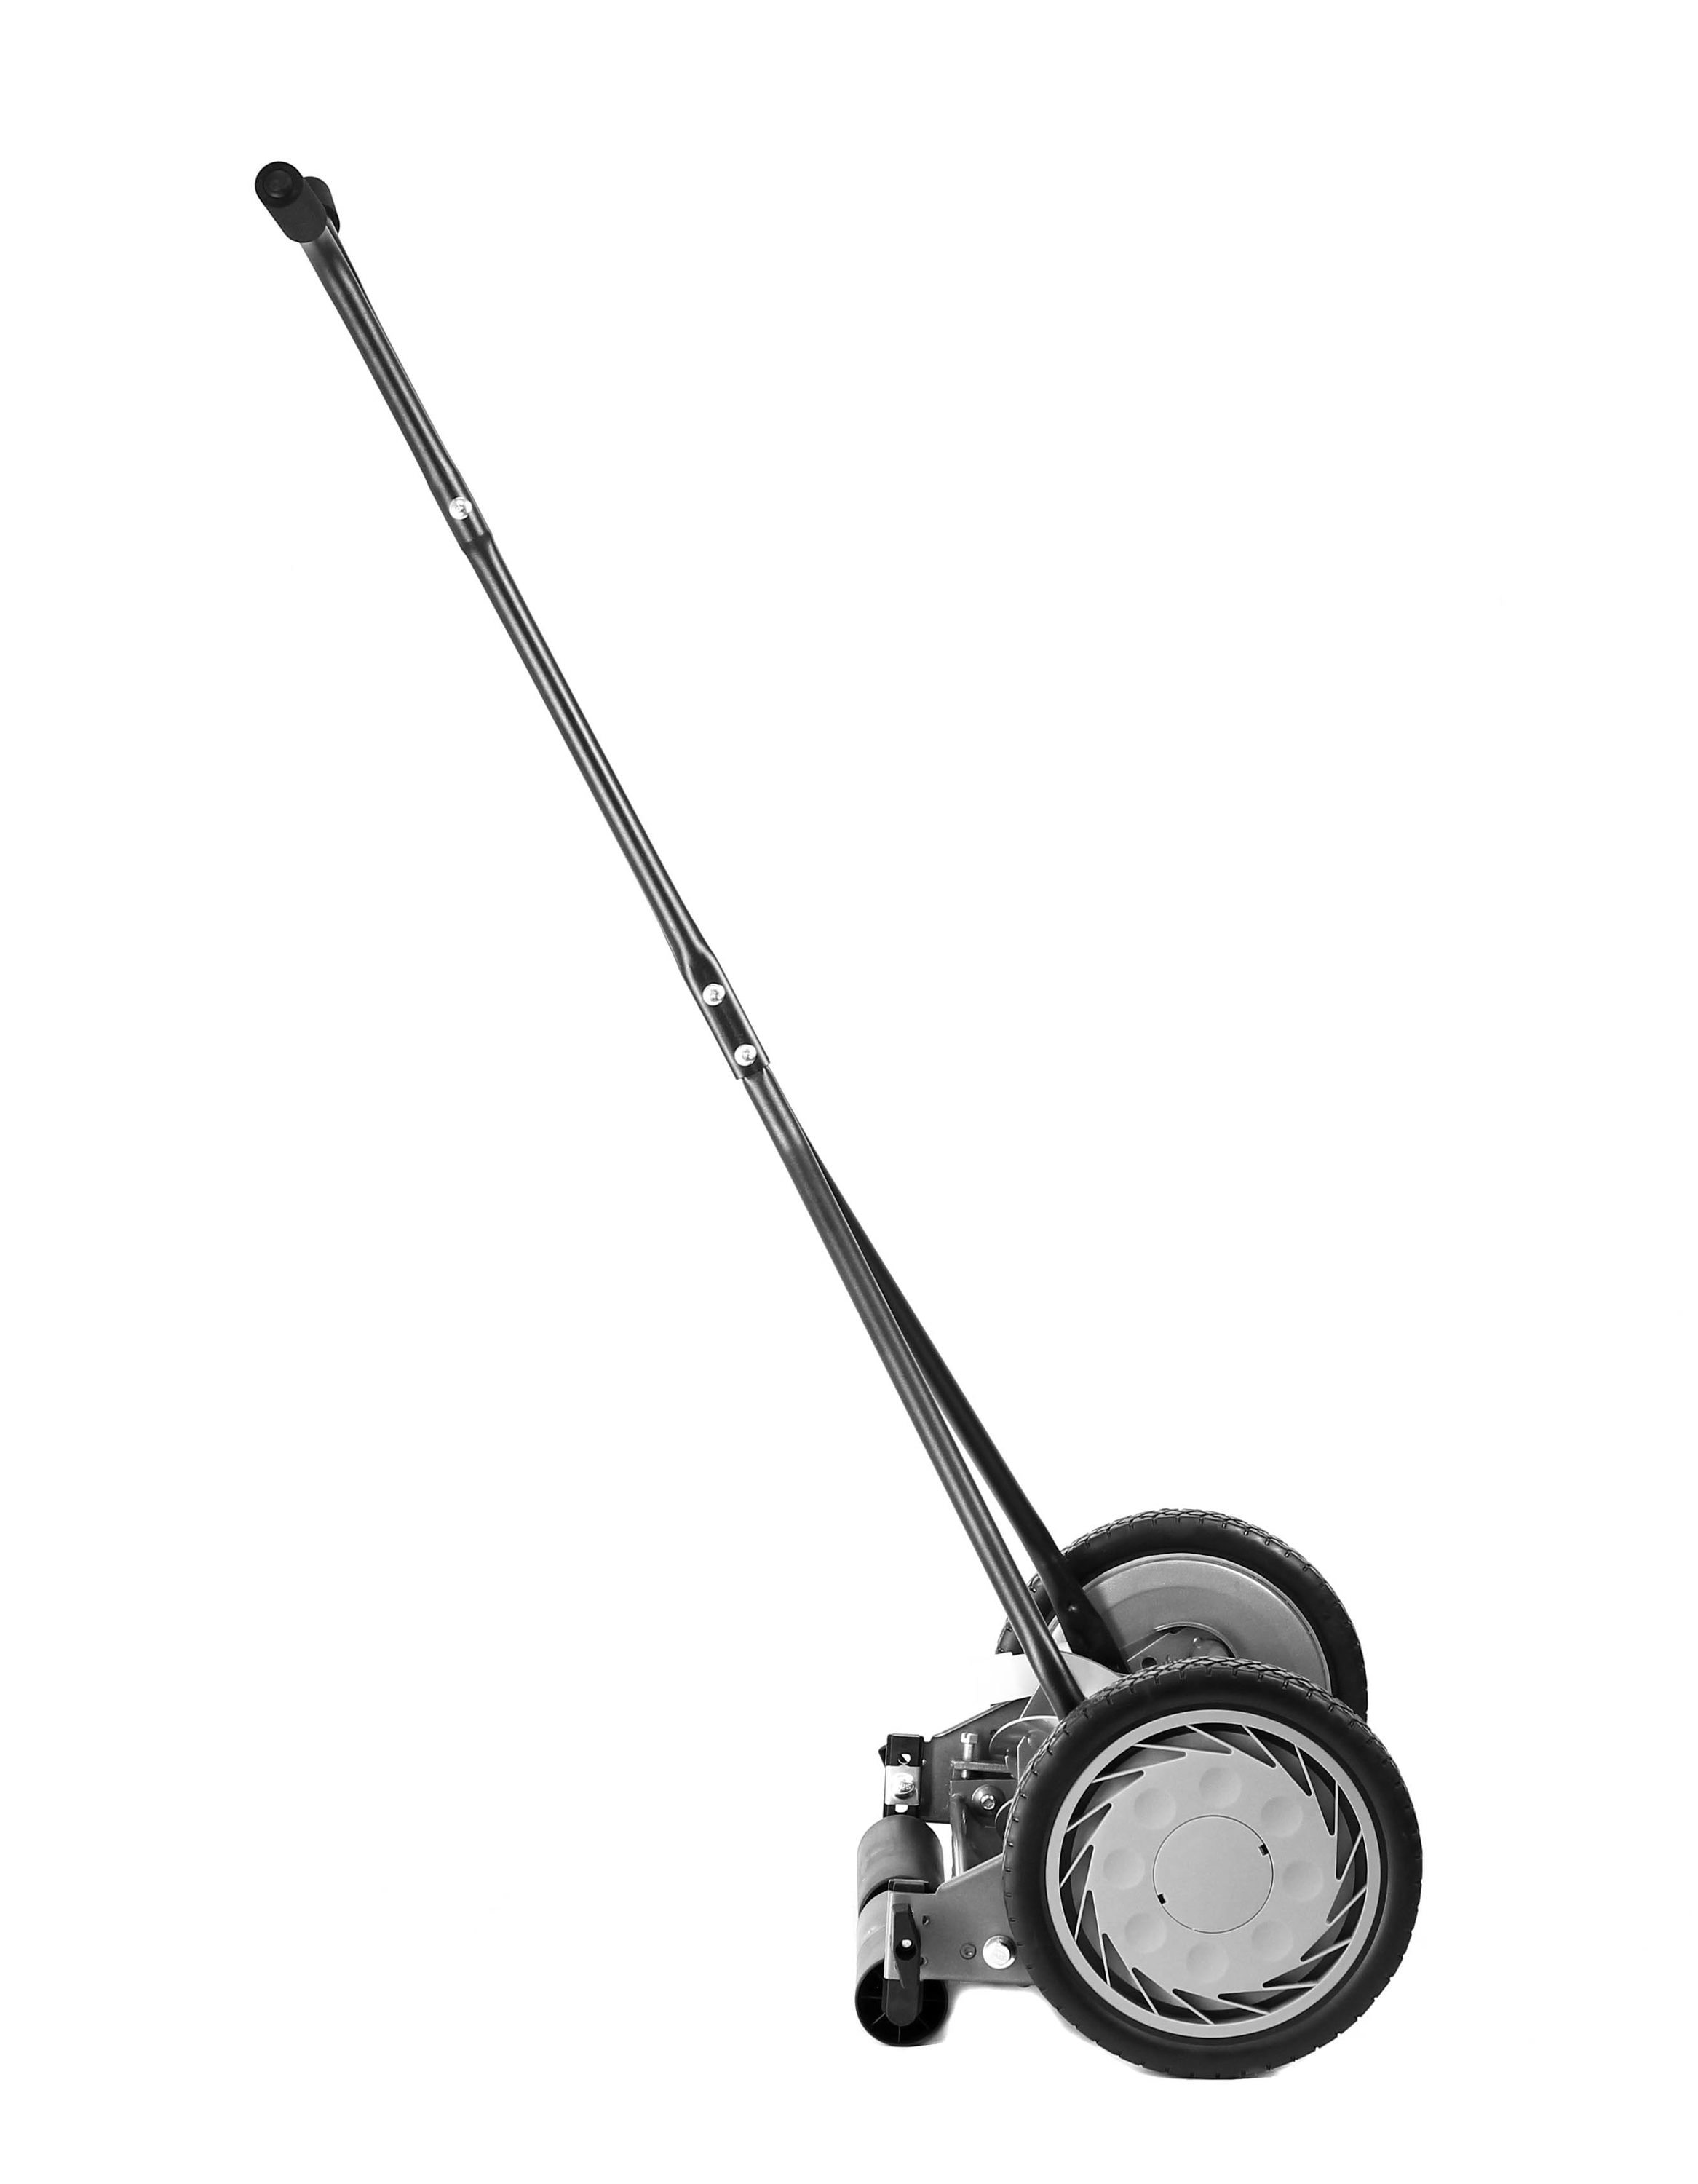 American Lawn Mower 16-Inch Reel Lawn Mower with 5-Blade Ball